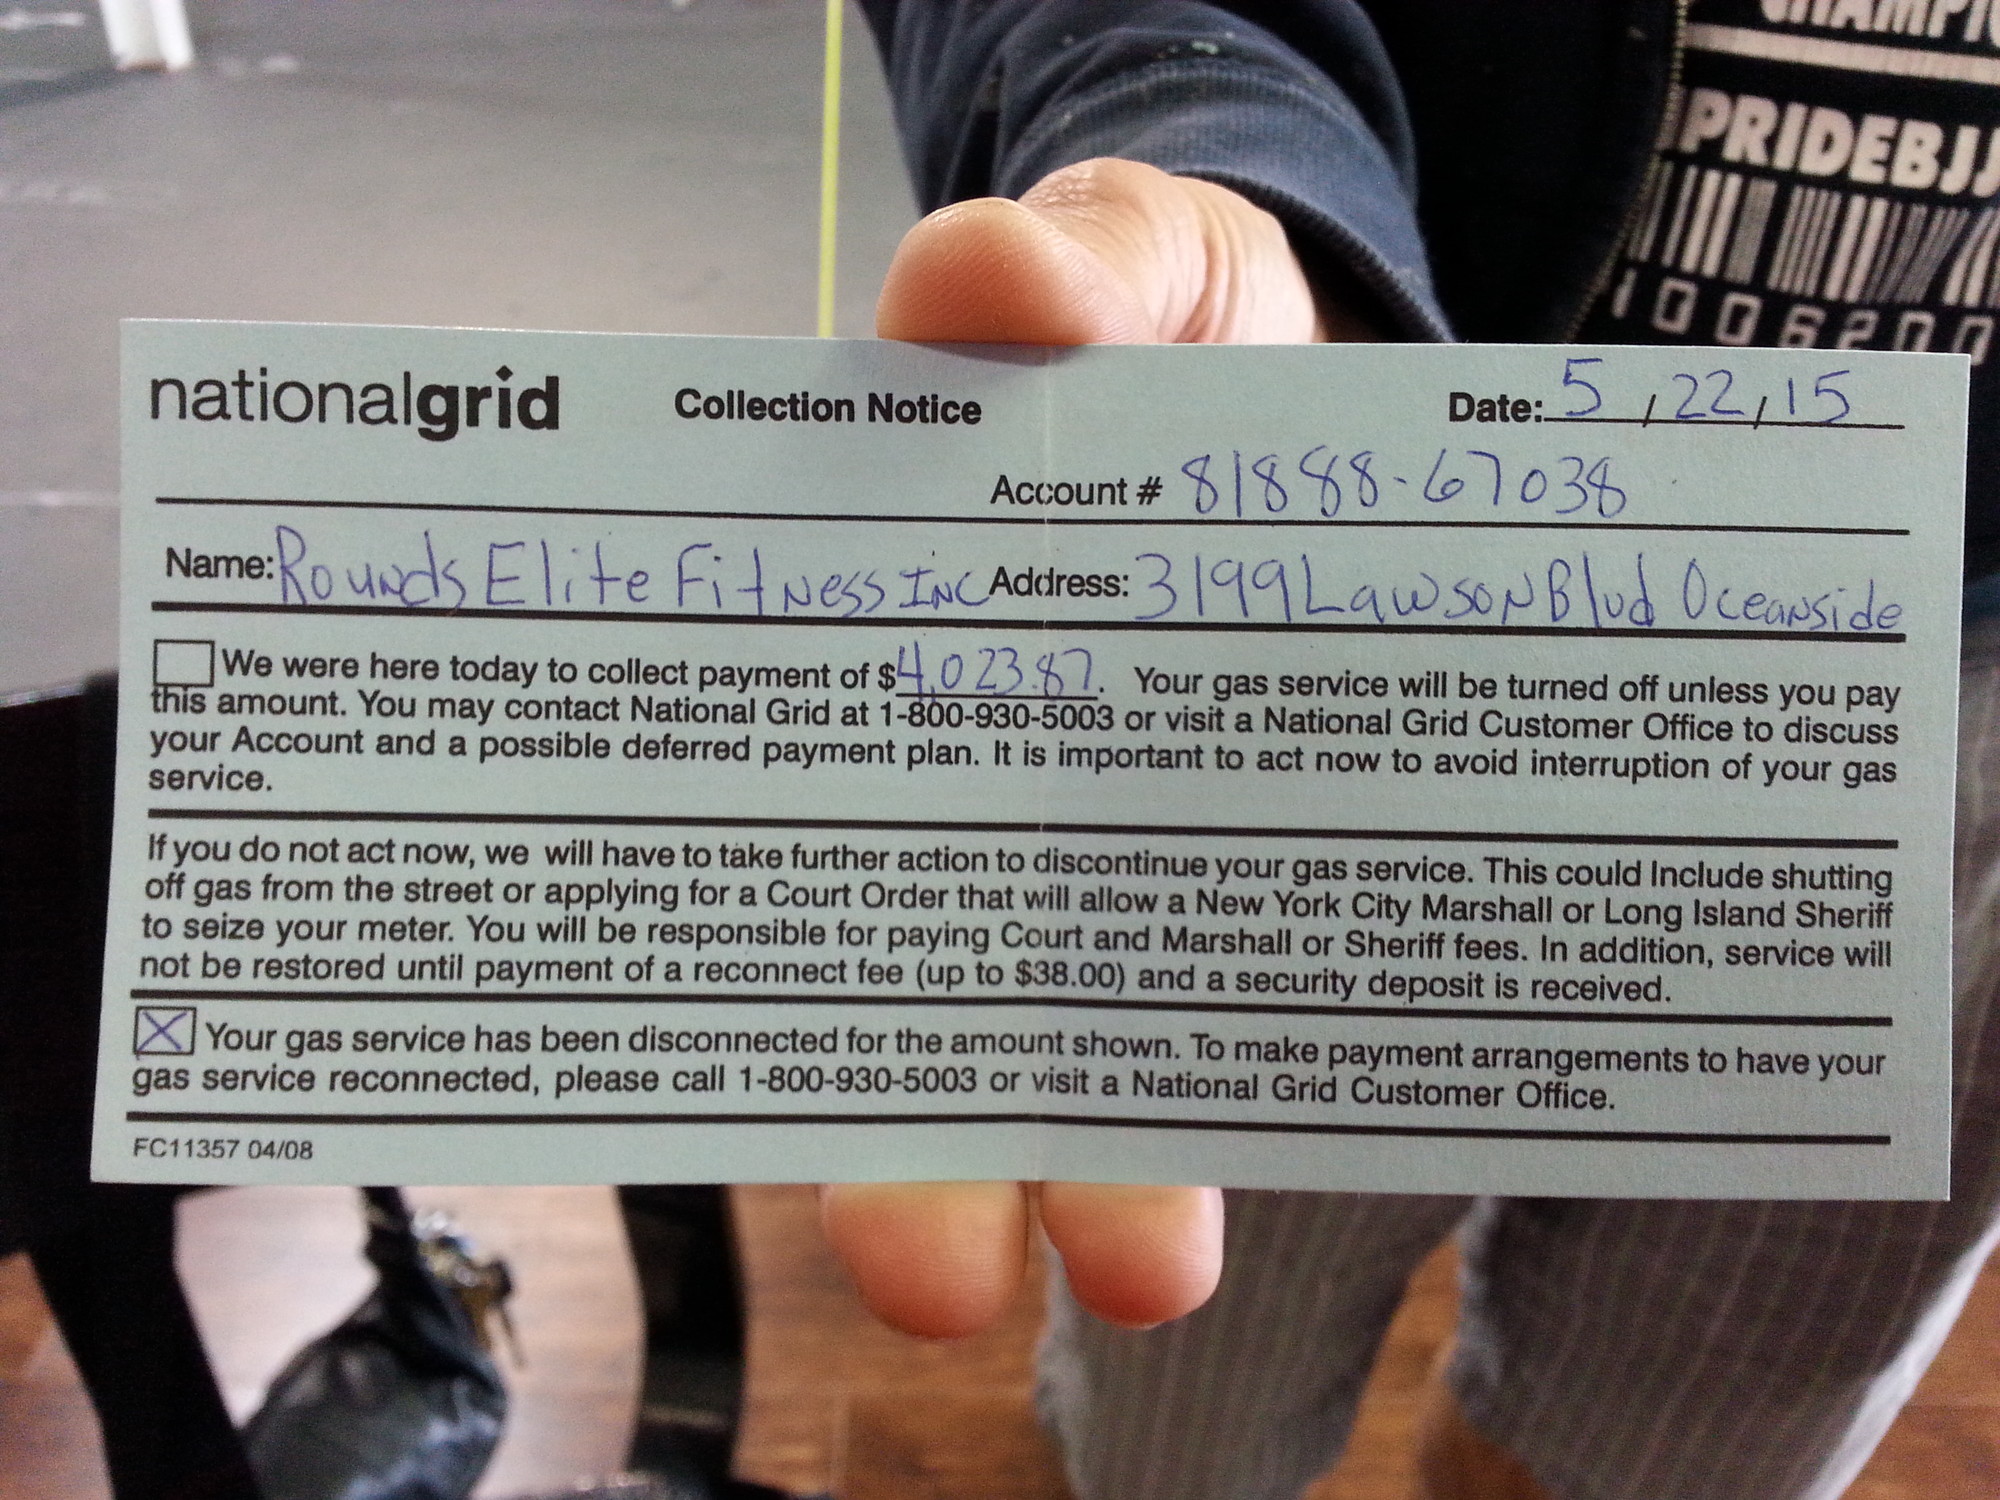 The bill from National Grid